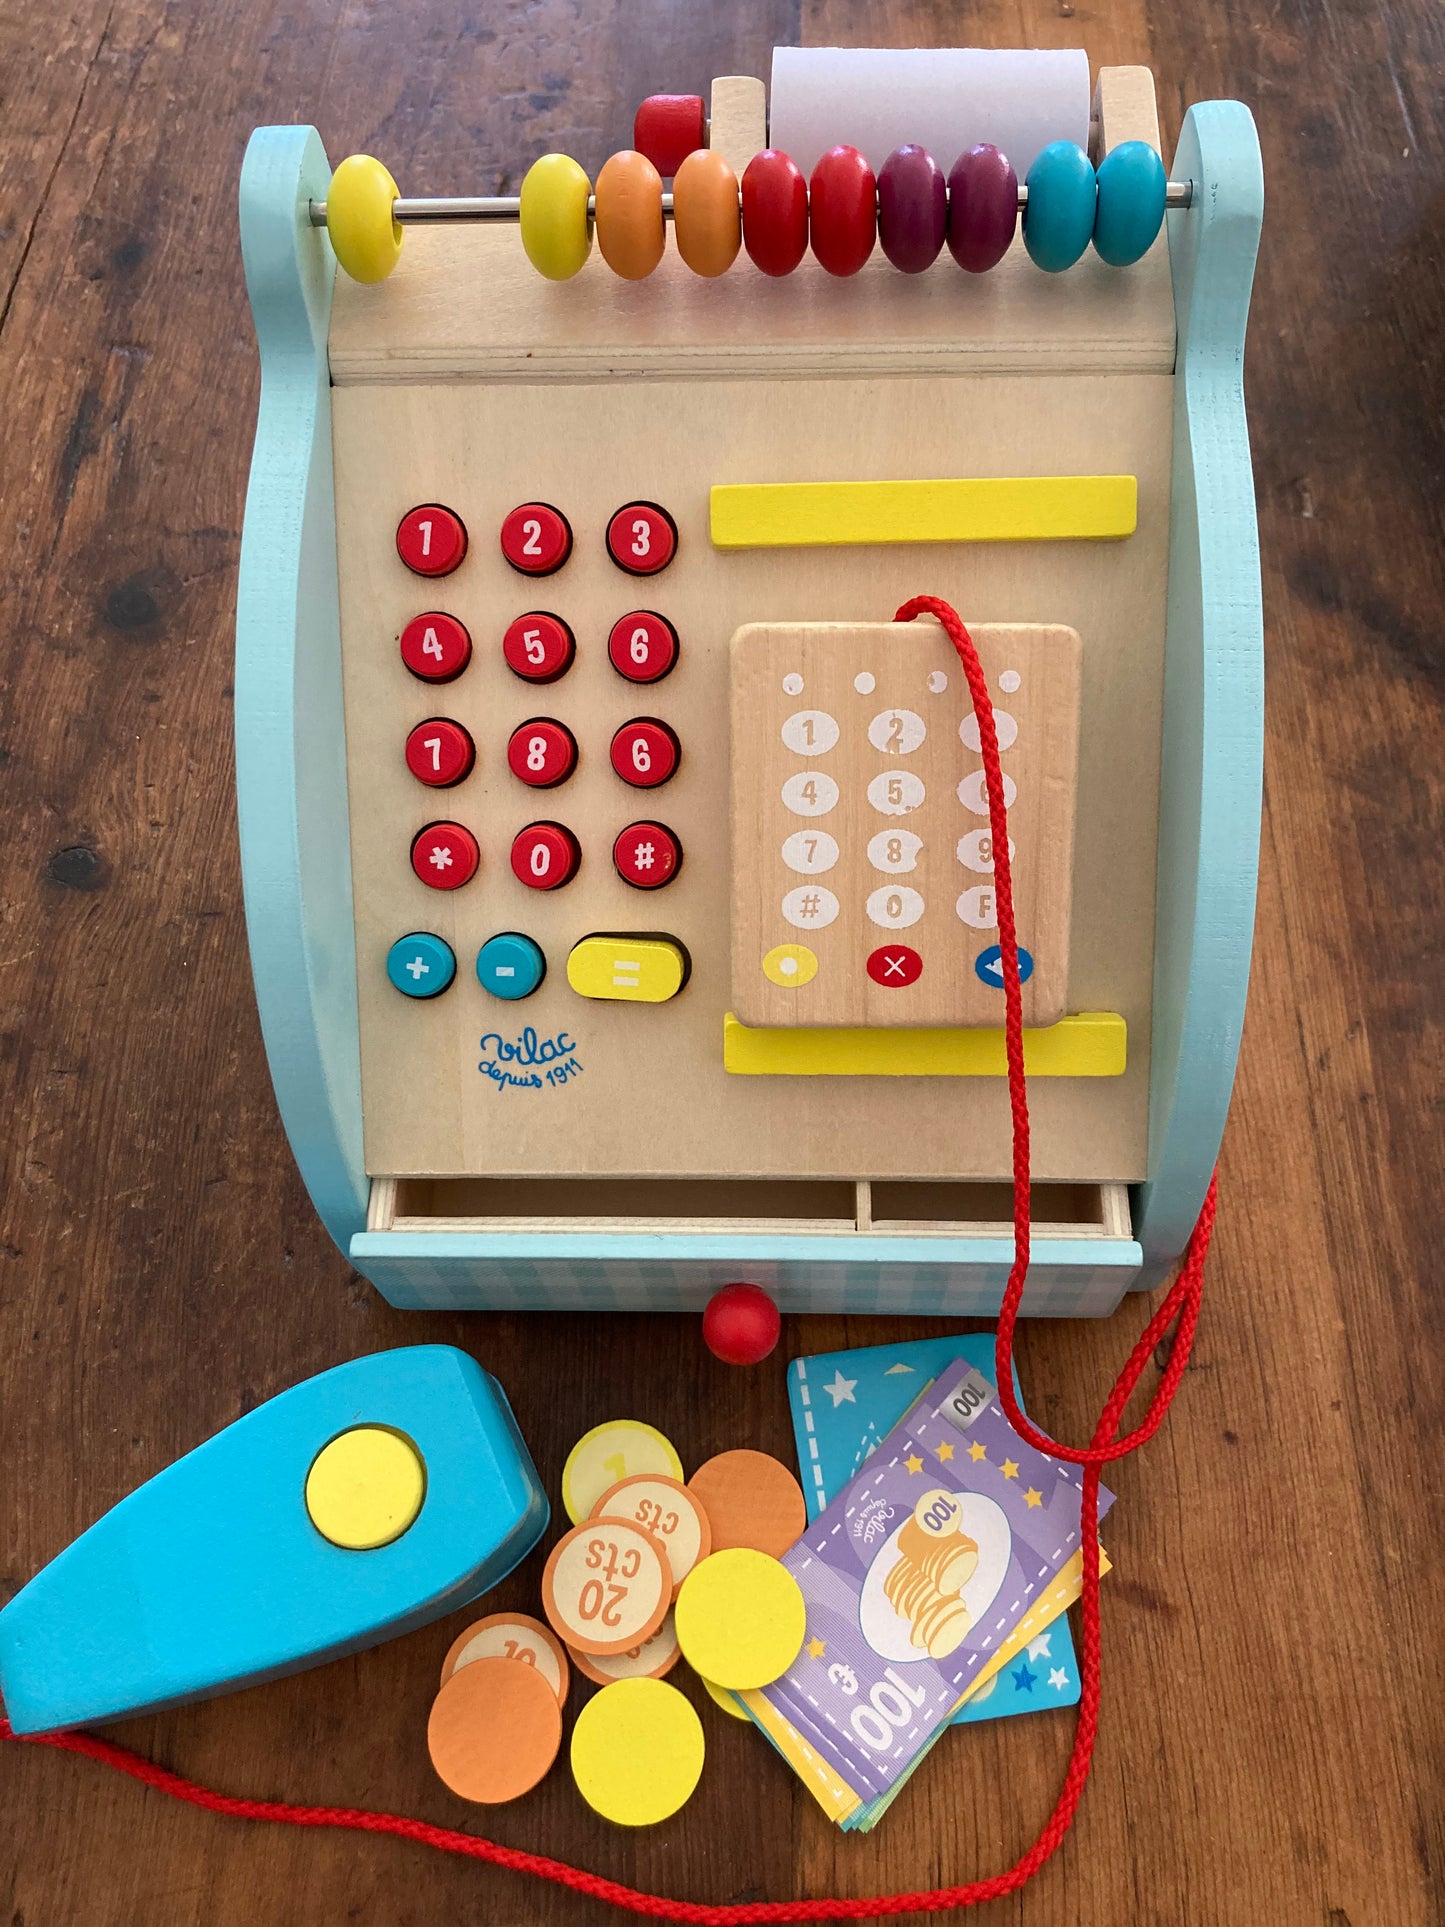 Keeping House Play - Wooden Toy CASH REGISTER